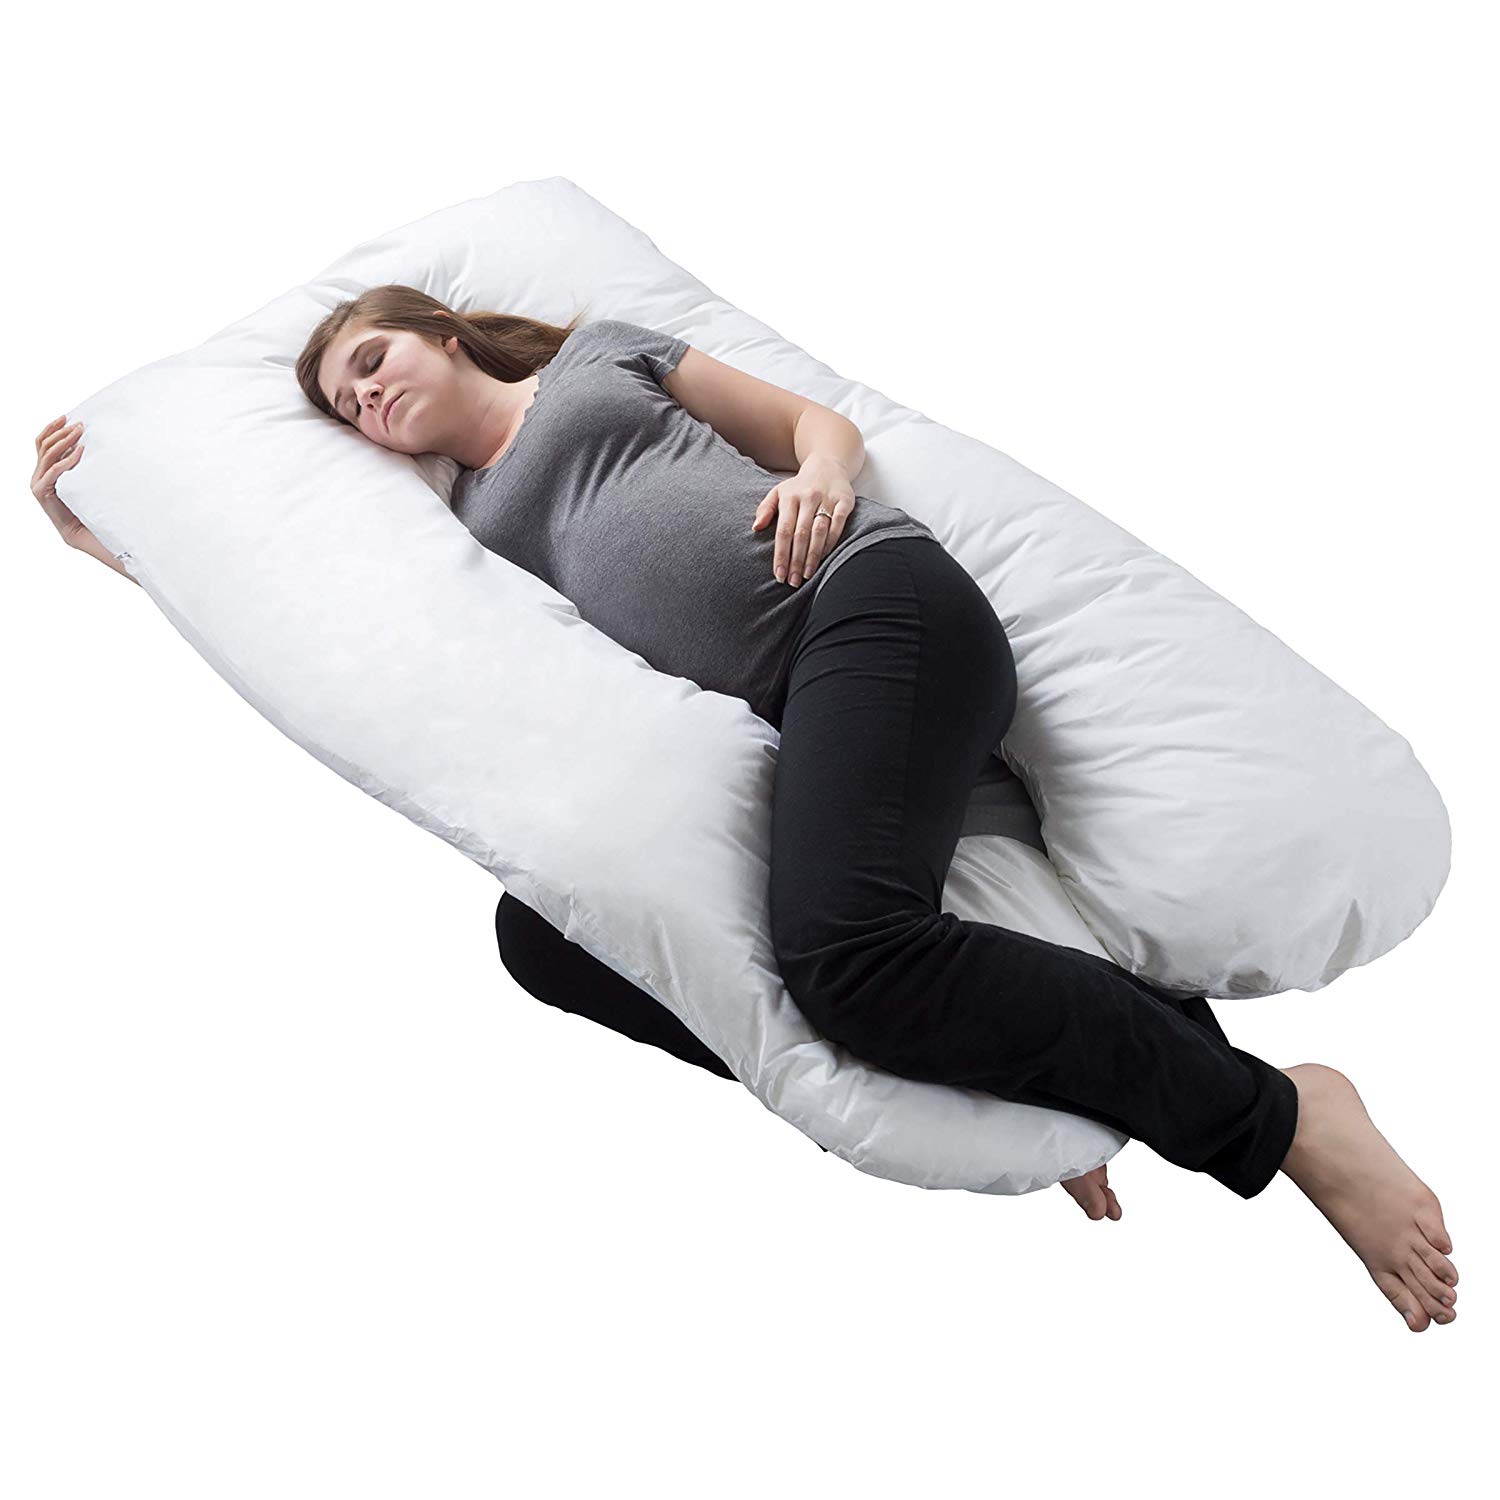 You are currently viewing Flannel Pregnancy Pillows